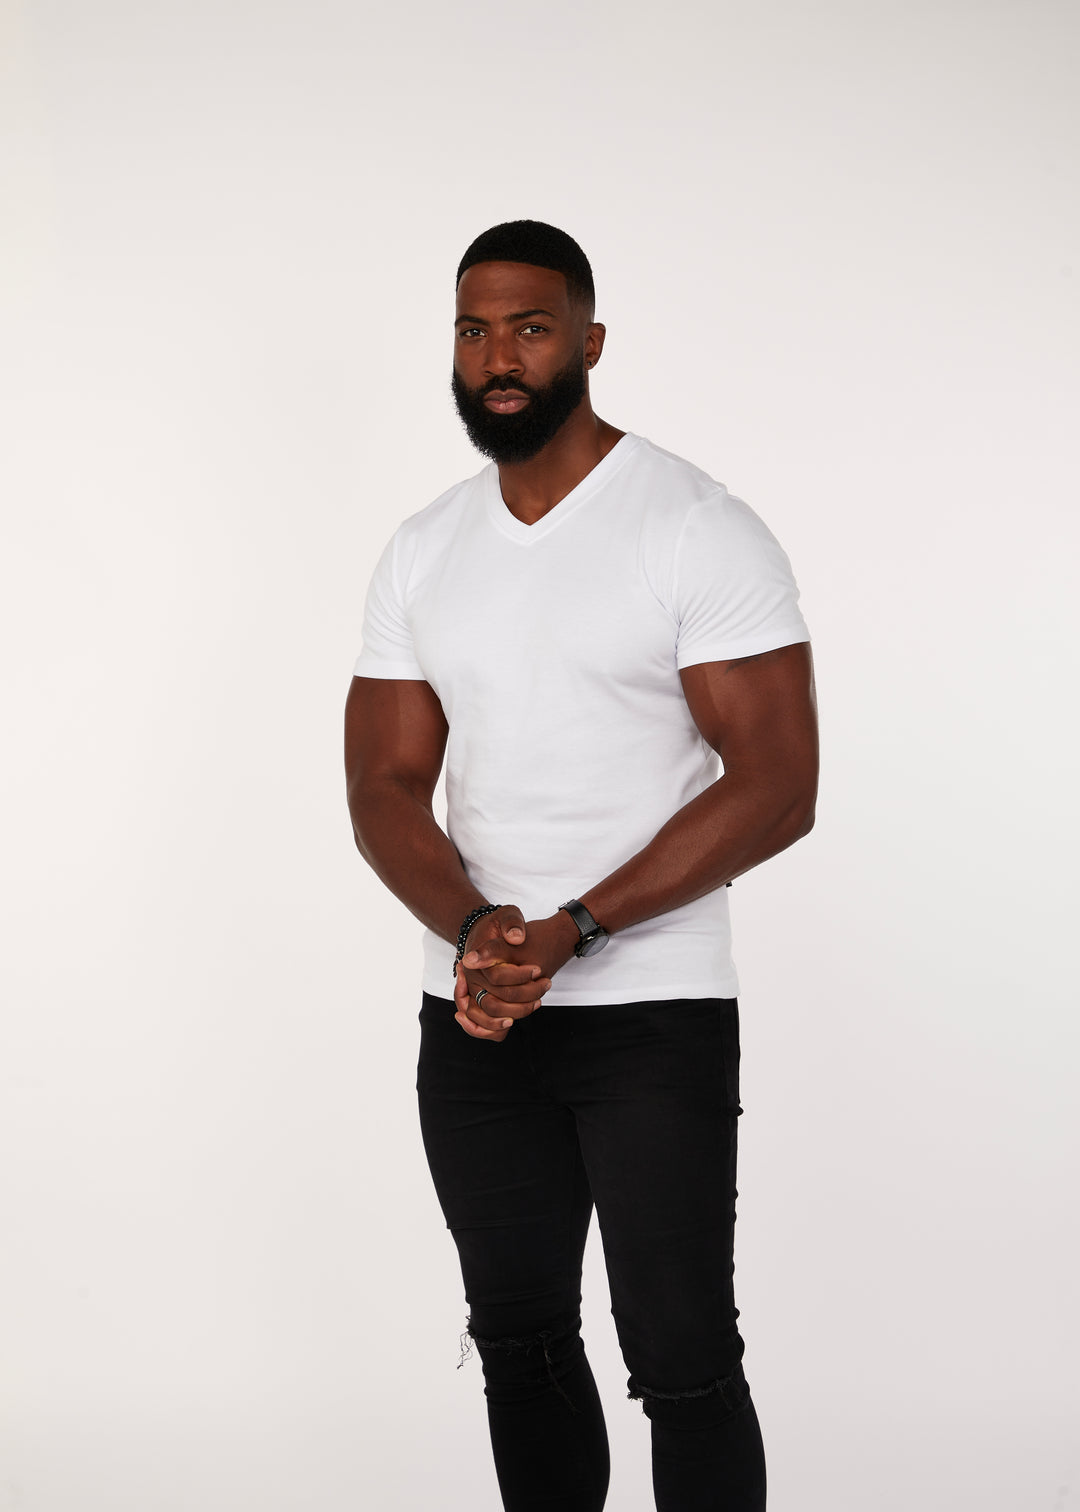 White Tapered Fit V-Neck T-Shirt. A Proportionally Fitted and Muscle Fit V Neck. The best v neck t-shirt for bodybuilders